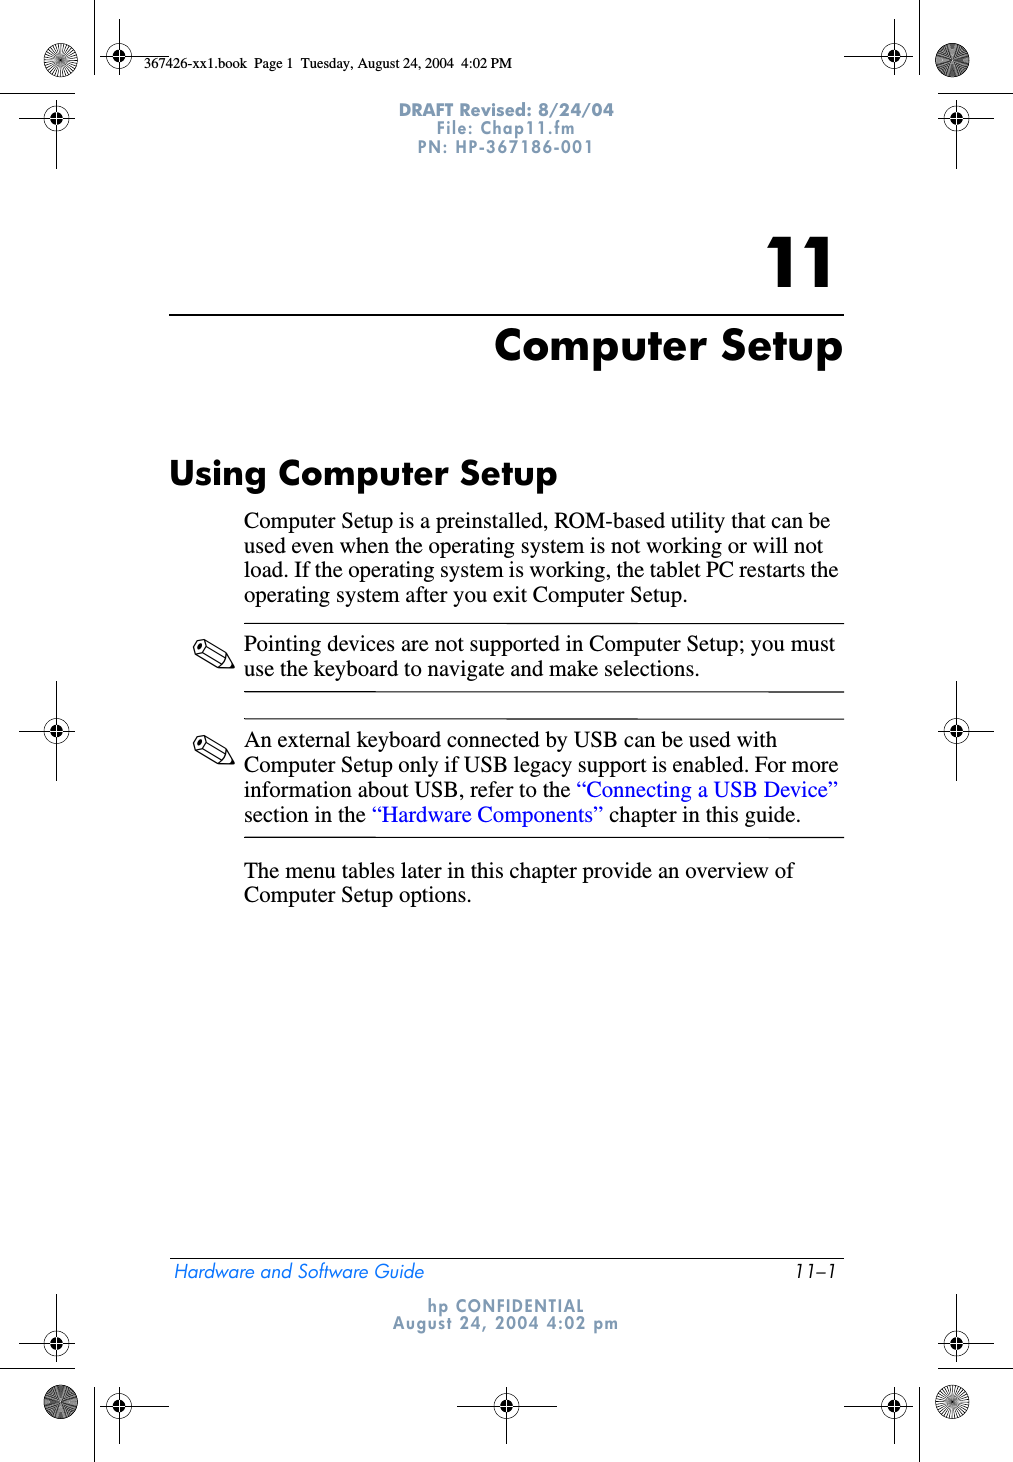 Hardware and Software Guide 11–1DRAFT Revised: 8/24/04File: Chap11.fm PN: HP-367186-001 hp CONFIDENTIALAugust 24, 2004 4:02 pm11Computer SetupUsing Computer Setup Computer Setup is a preinstalled, ROM-based utility that can be used even when the operating system is not working or will not load. If the operating system is working, the tablet PC restarts the operating system after you exit Computer Setup.✎Pointing devices are not supported in Computer Setup; you must use the keyboard to navigate and make selections.✎An external keyboard connected by USB can be used with Computer Setup only if USB legacy support is enabled. For more information about USB, refer to the “Connecting a USB Device” section in the “Hardware Components” chapter in this guide.The menu tables later in this chapter provide an overview of Computer Setup options.367426-xx1.book  Page 1  Tuesday, August 24, 2004  4:02 PM